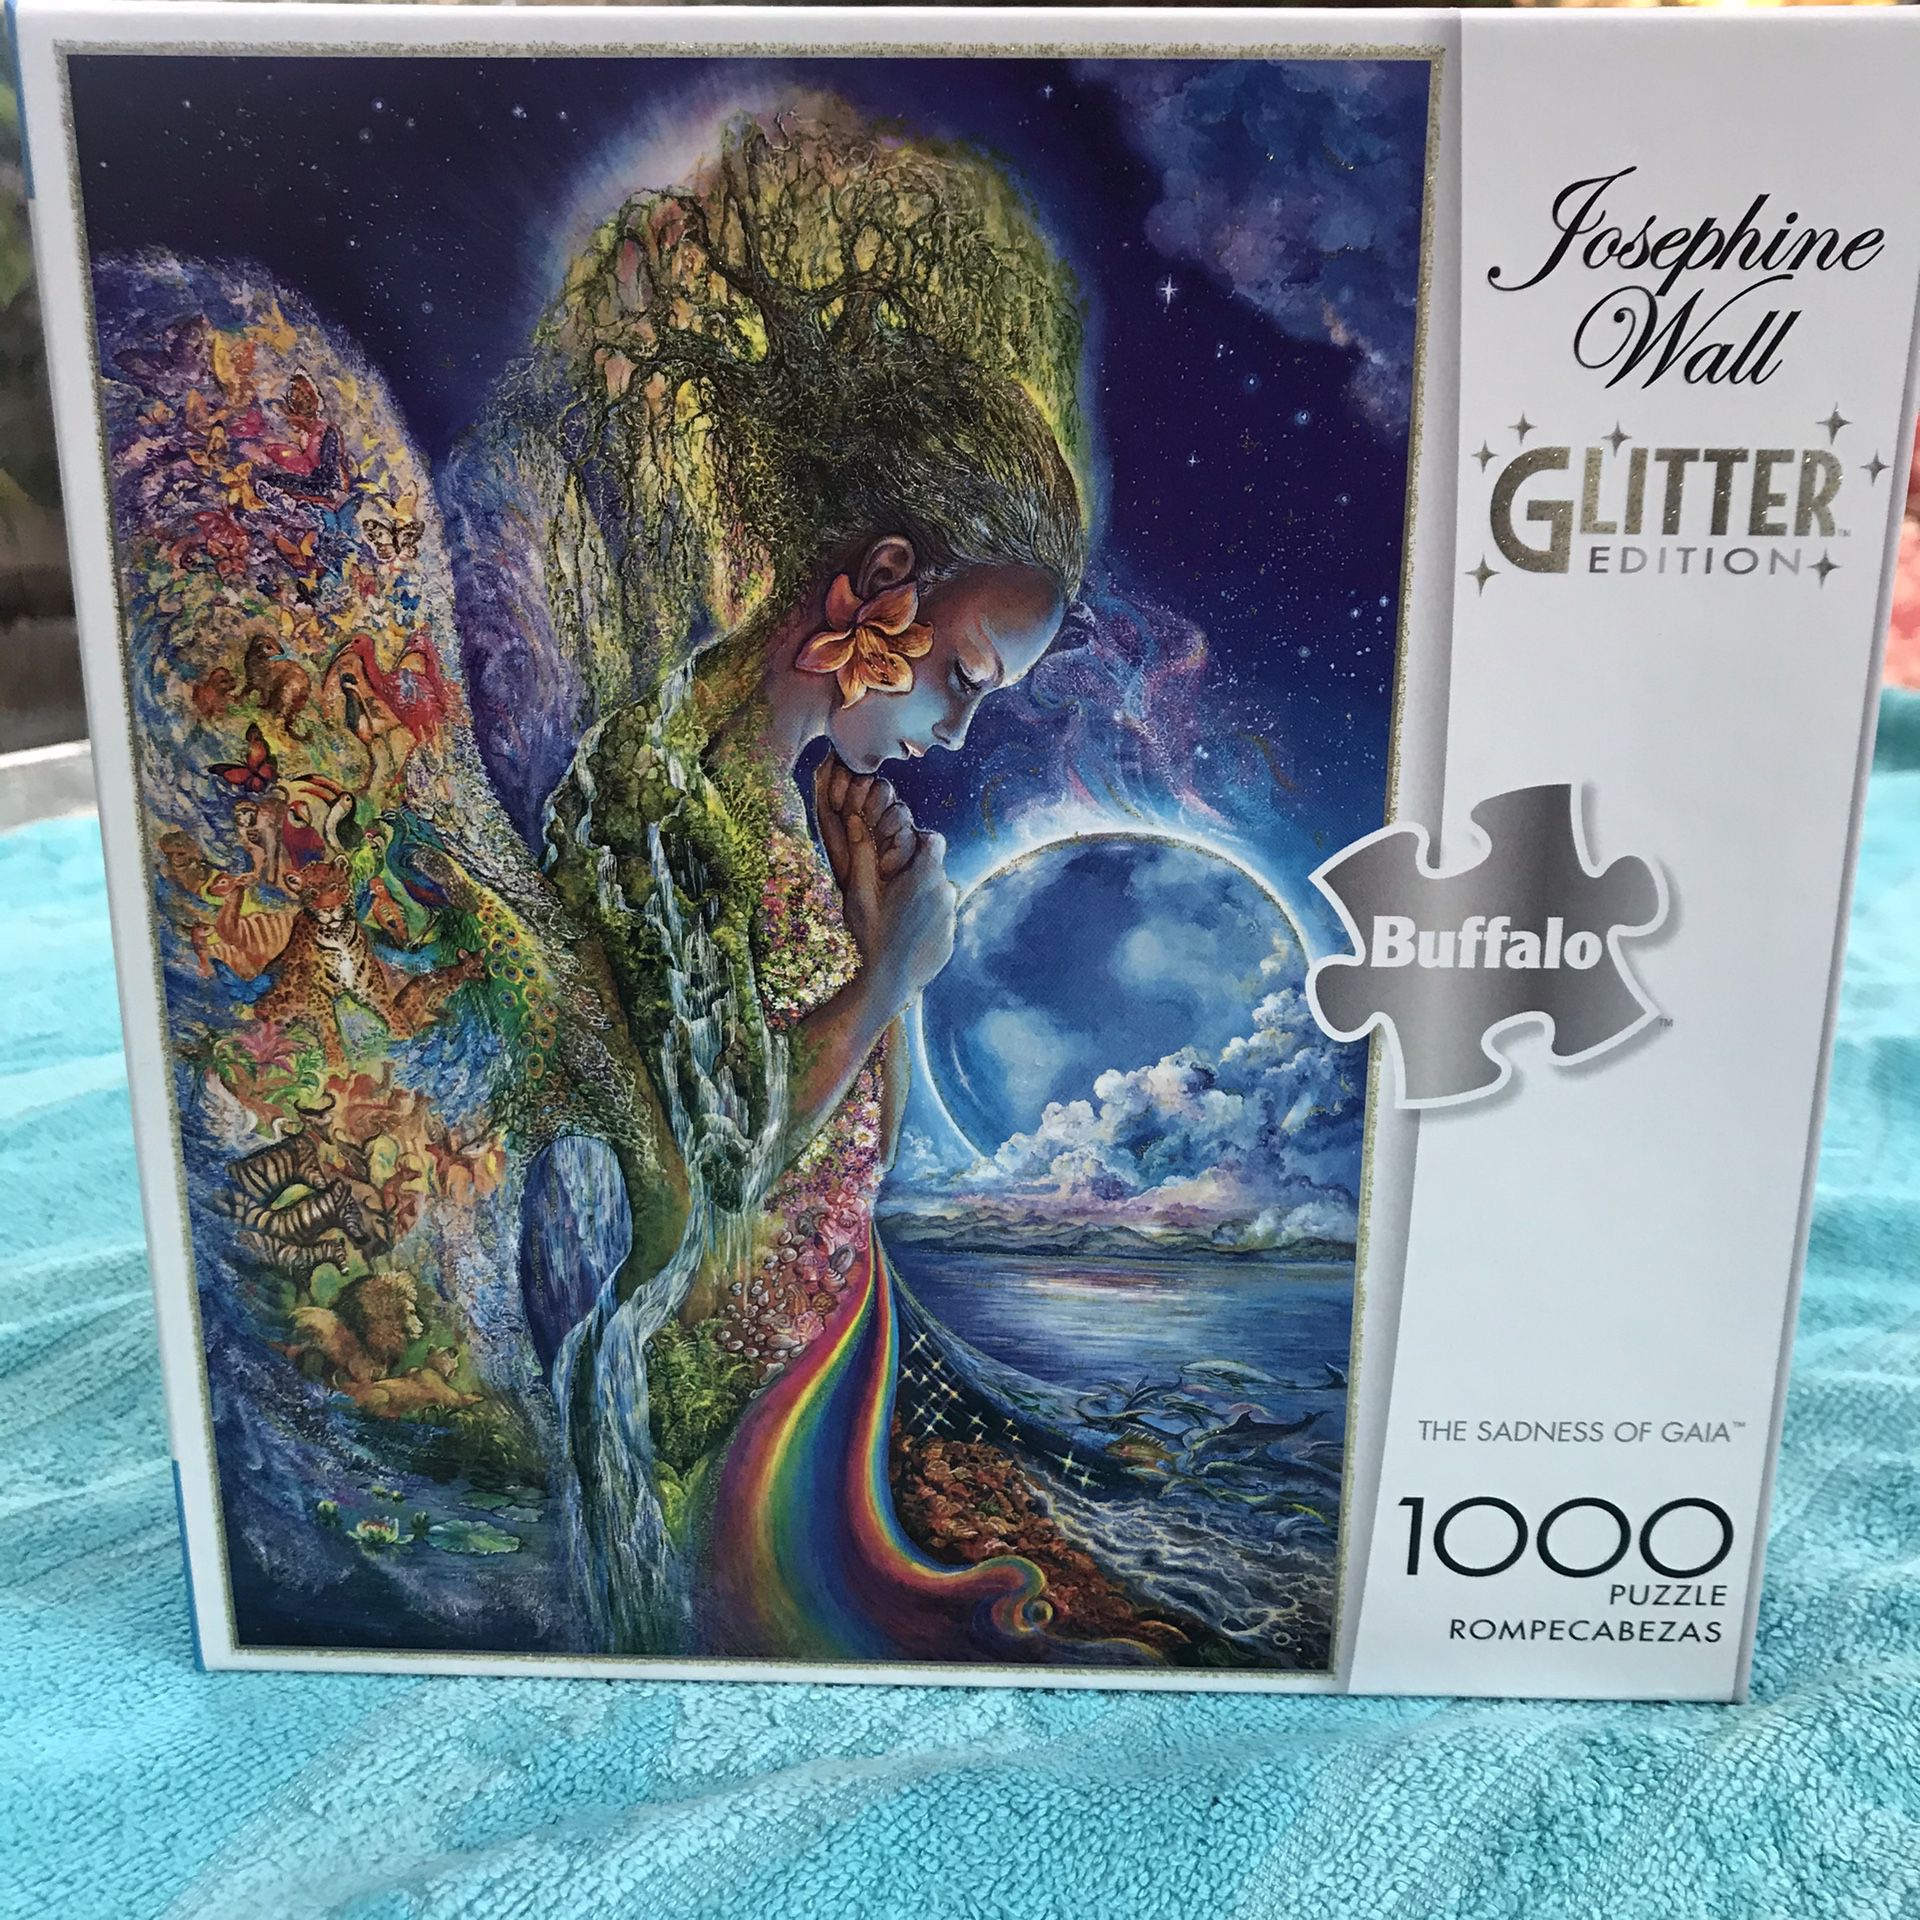 NEW!!! 1000 Piece Jigsaw Puzzle THE SADNESS OF GAIA